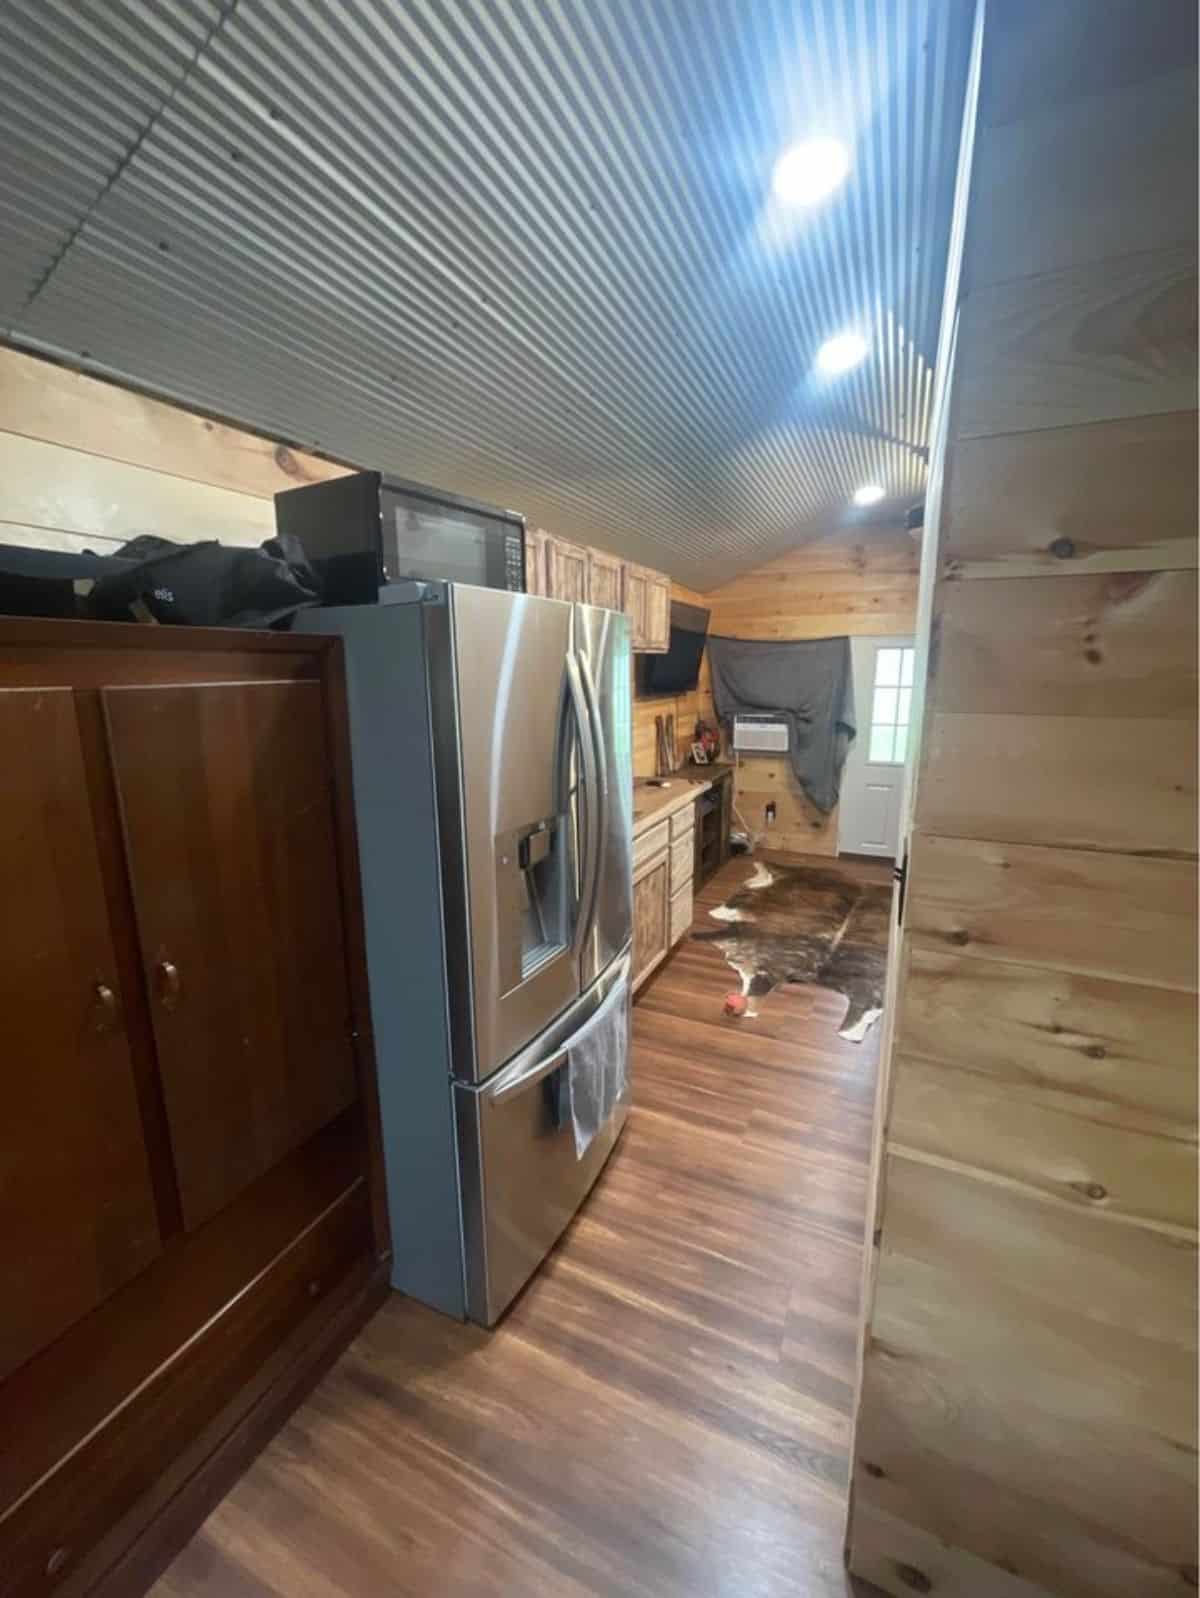 Refrigerator is also included into the kitchen